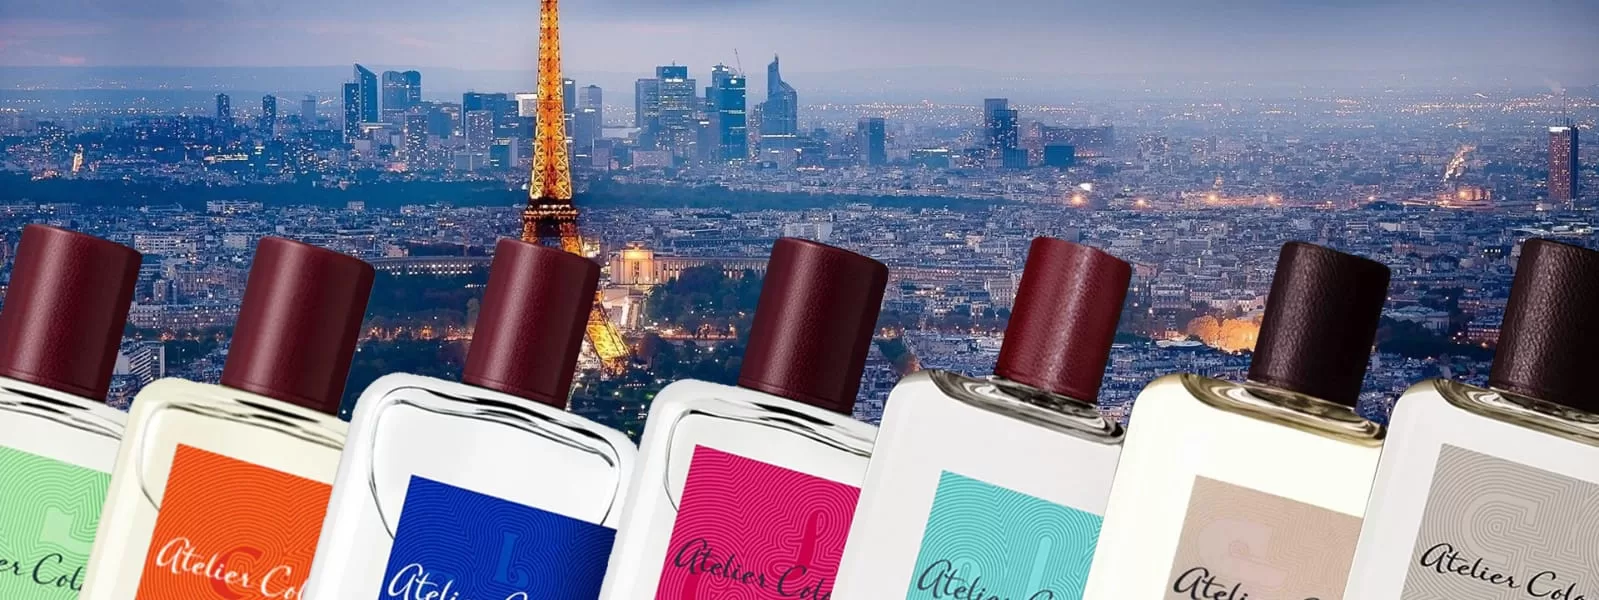 The Ultimate Guide To The Best Atelier Cologne Fragrances